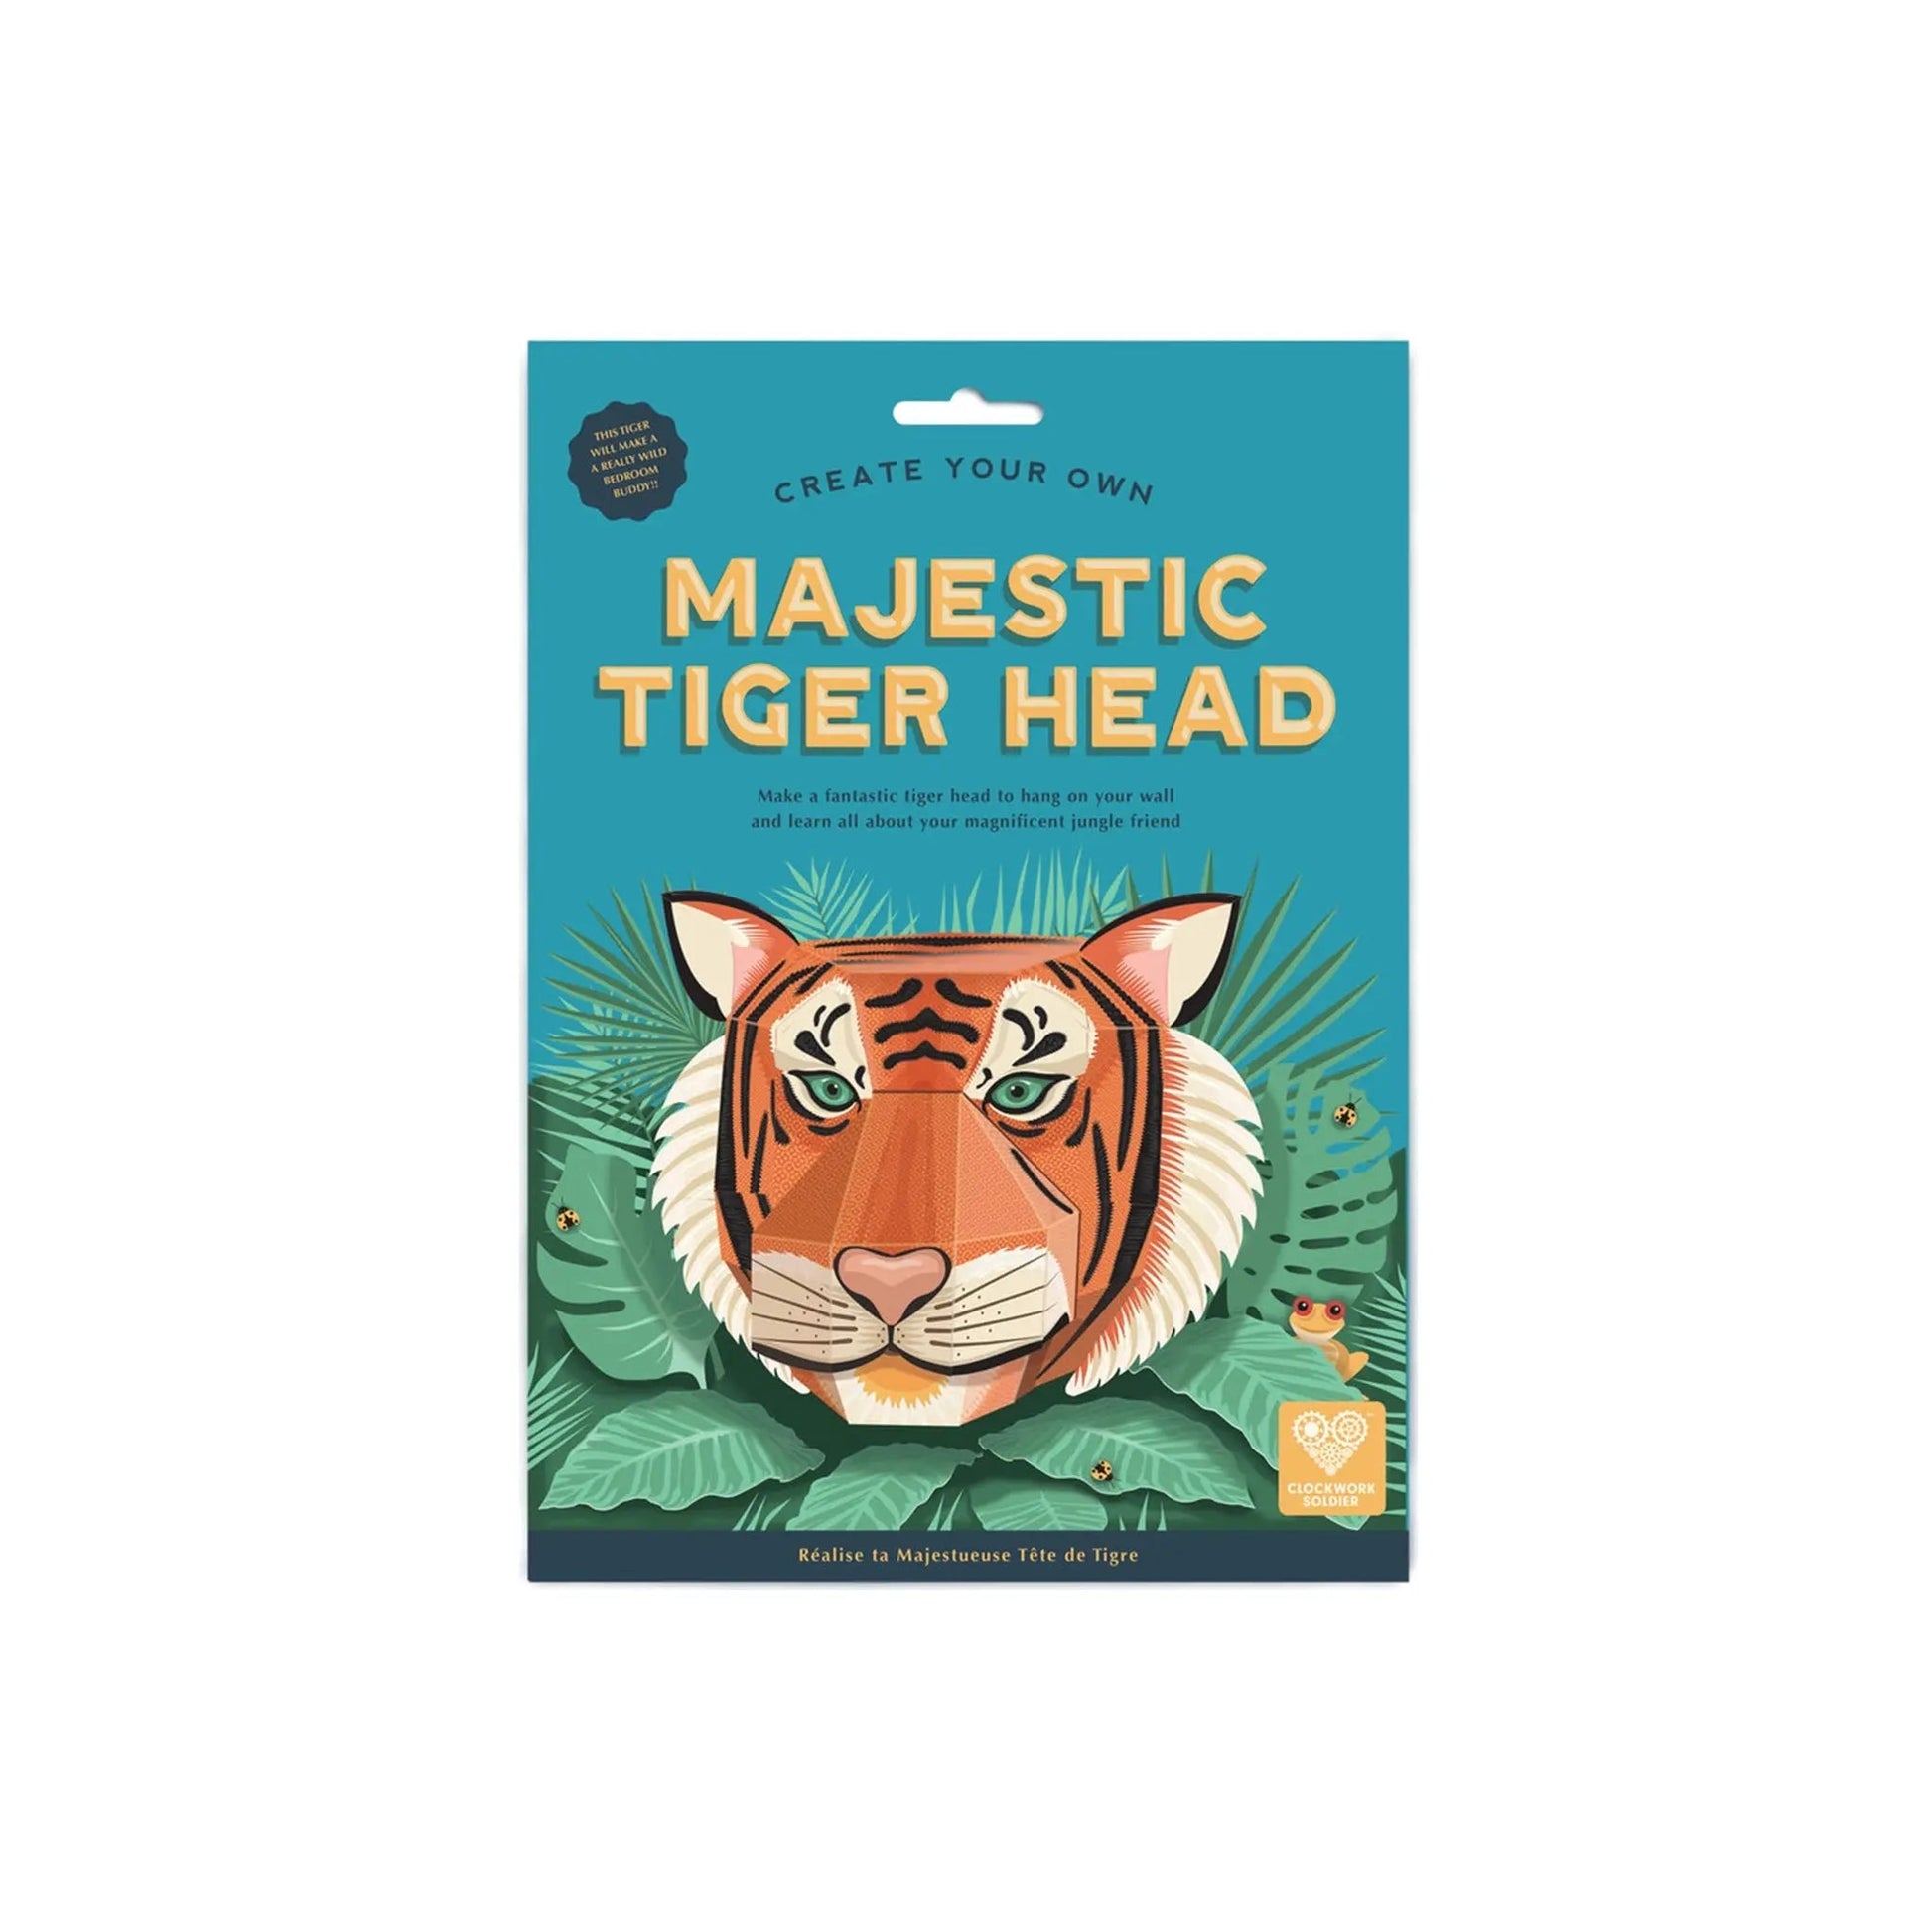 Create your own Majestic Tigers Head - Clockwork Soldier - The Forgotten Toy Shop